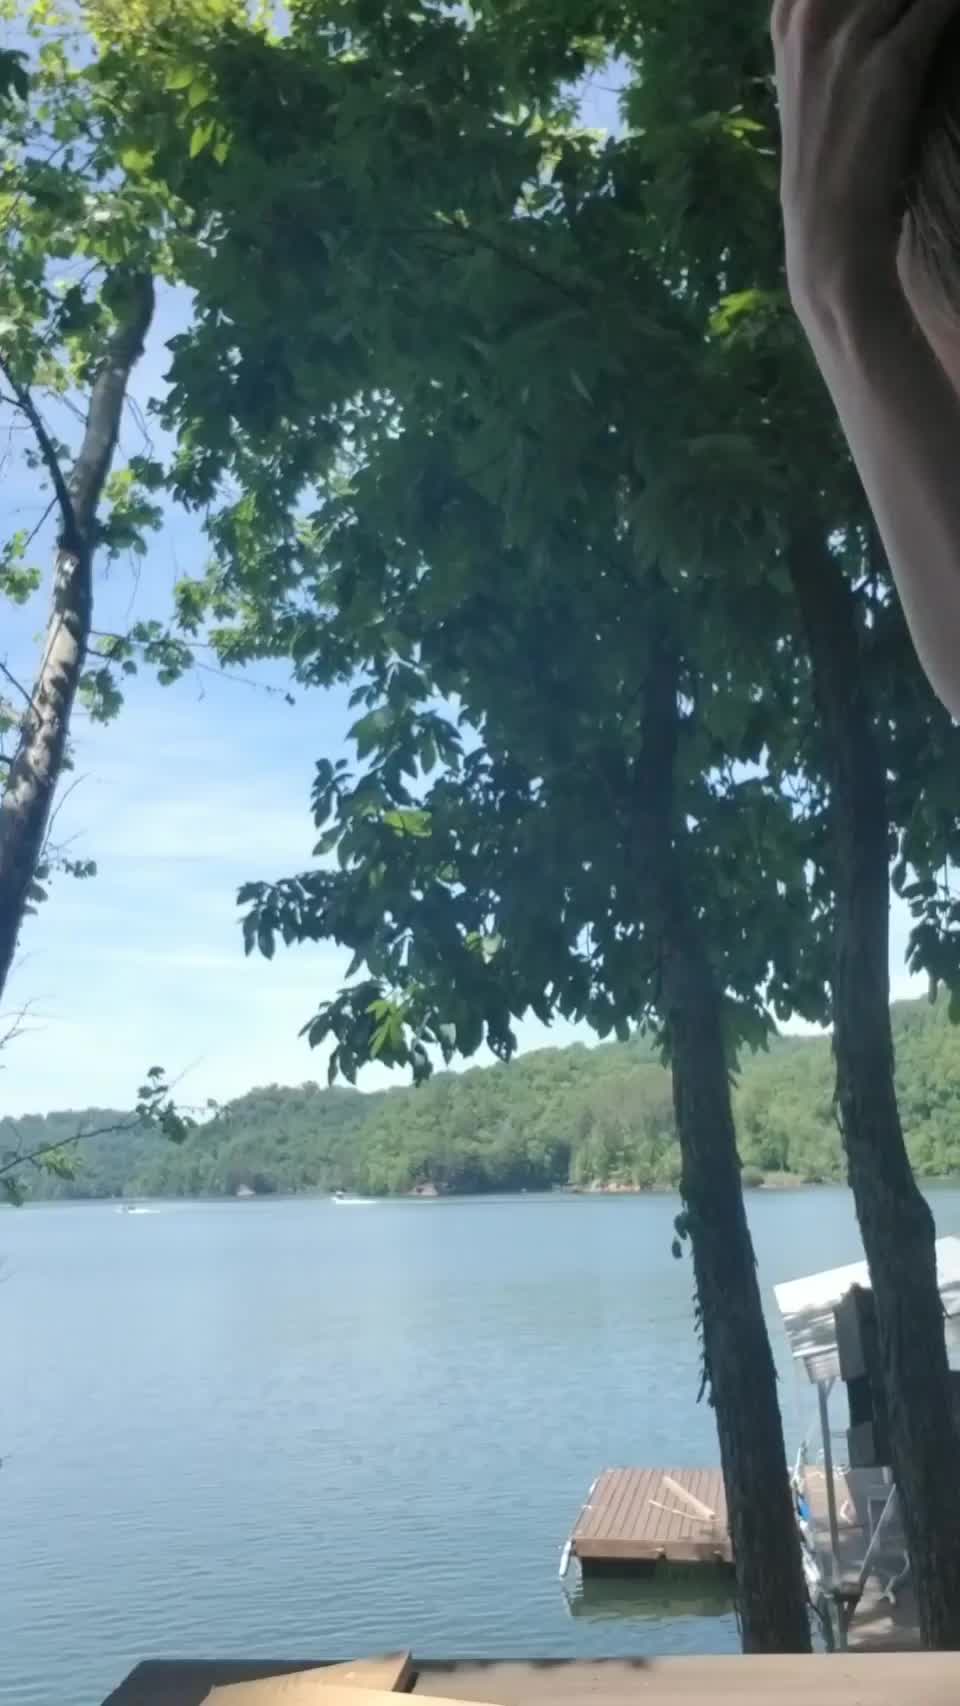 A quick flash by the lake [gif]